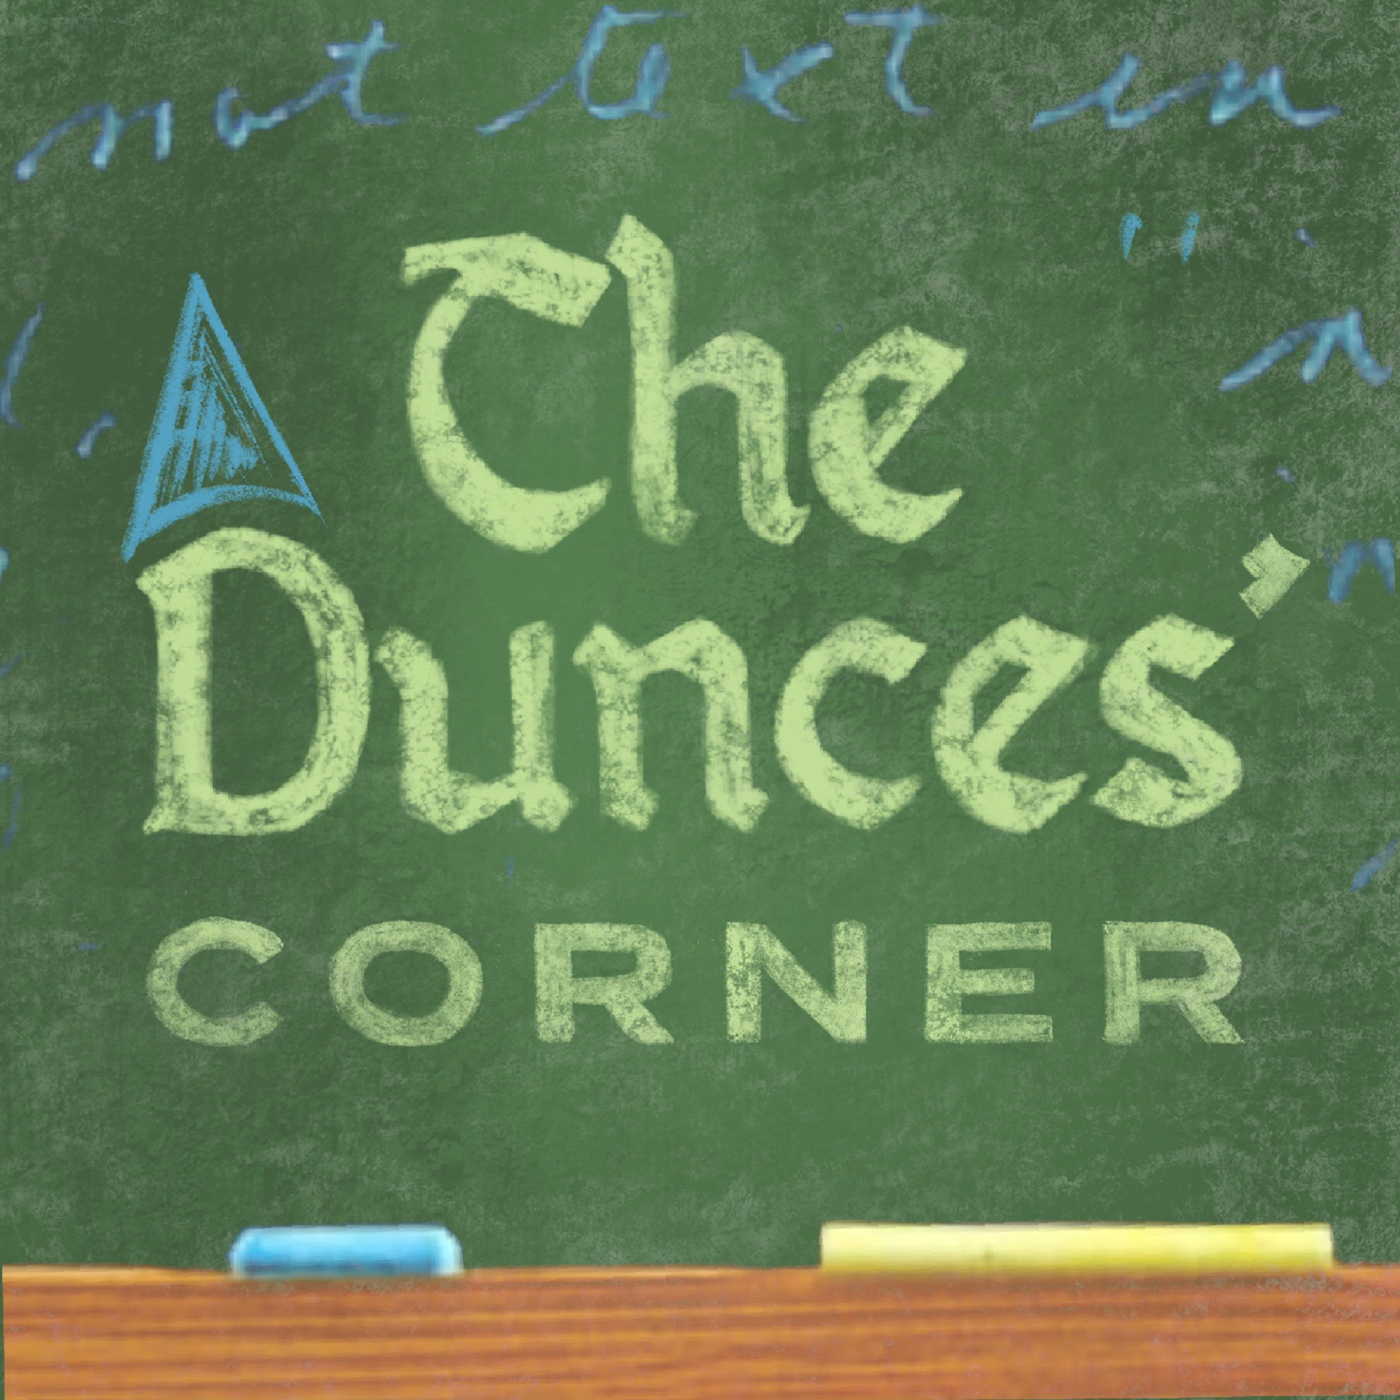 The Dunces Corner 3 How To Get The Most Out Of Lent Aka Have An Exce Lent (back) (play) (pause) (next) (download). lent aka have an exce lent